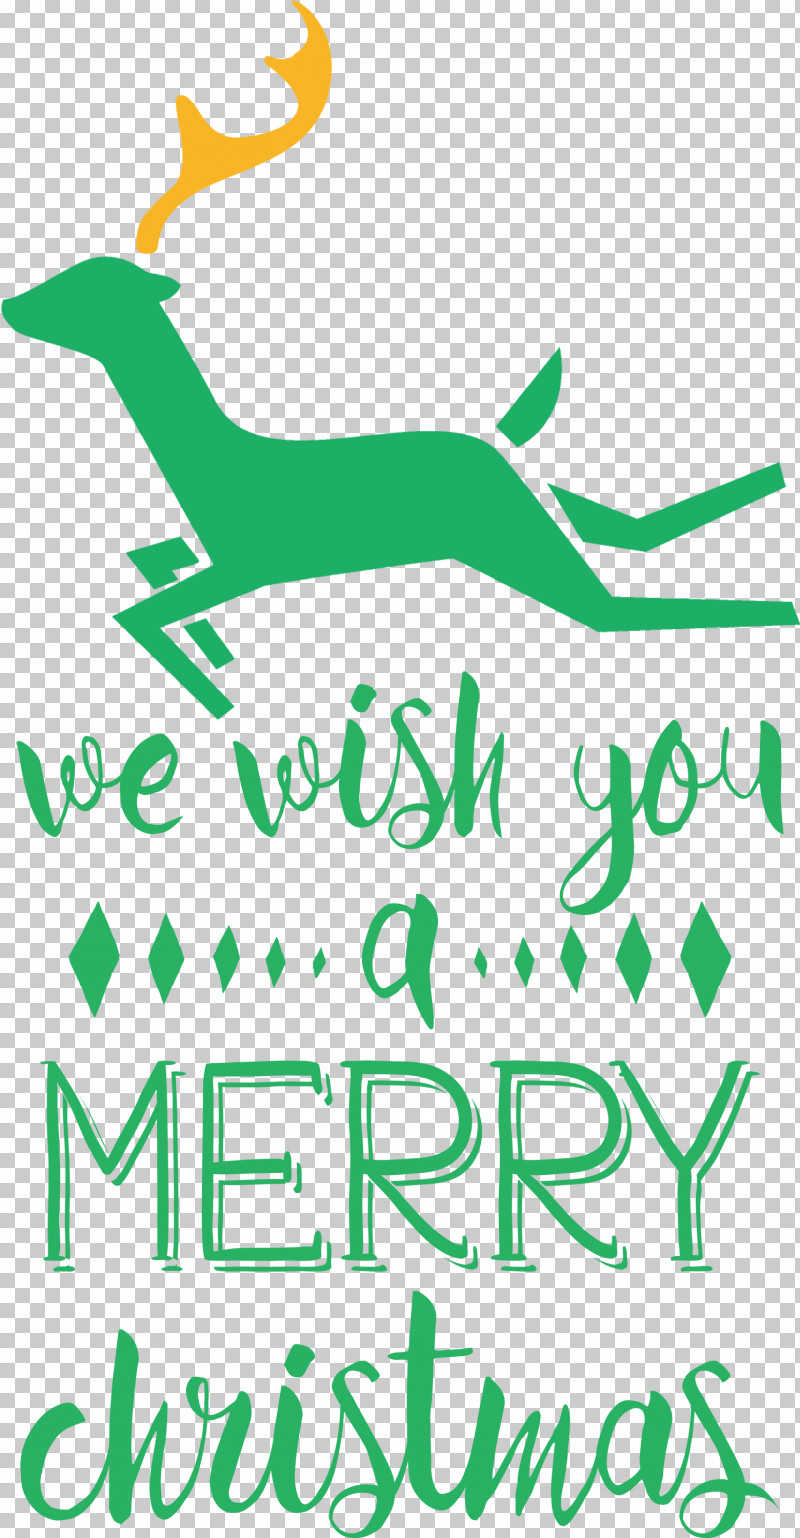 Merry Christmas Wish PNG, Clipart, Behavior, Green, Happiness, Human, Leaf Free PNG Download